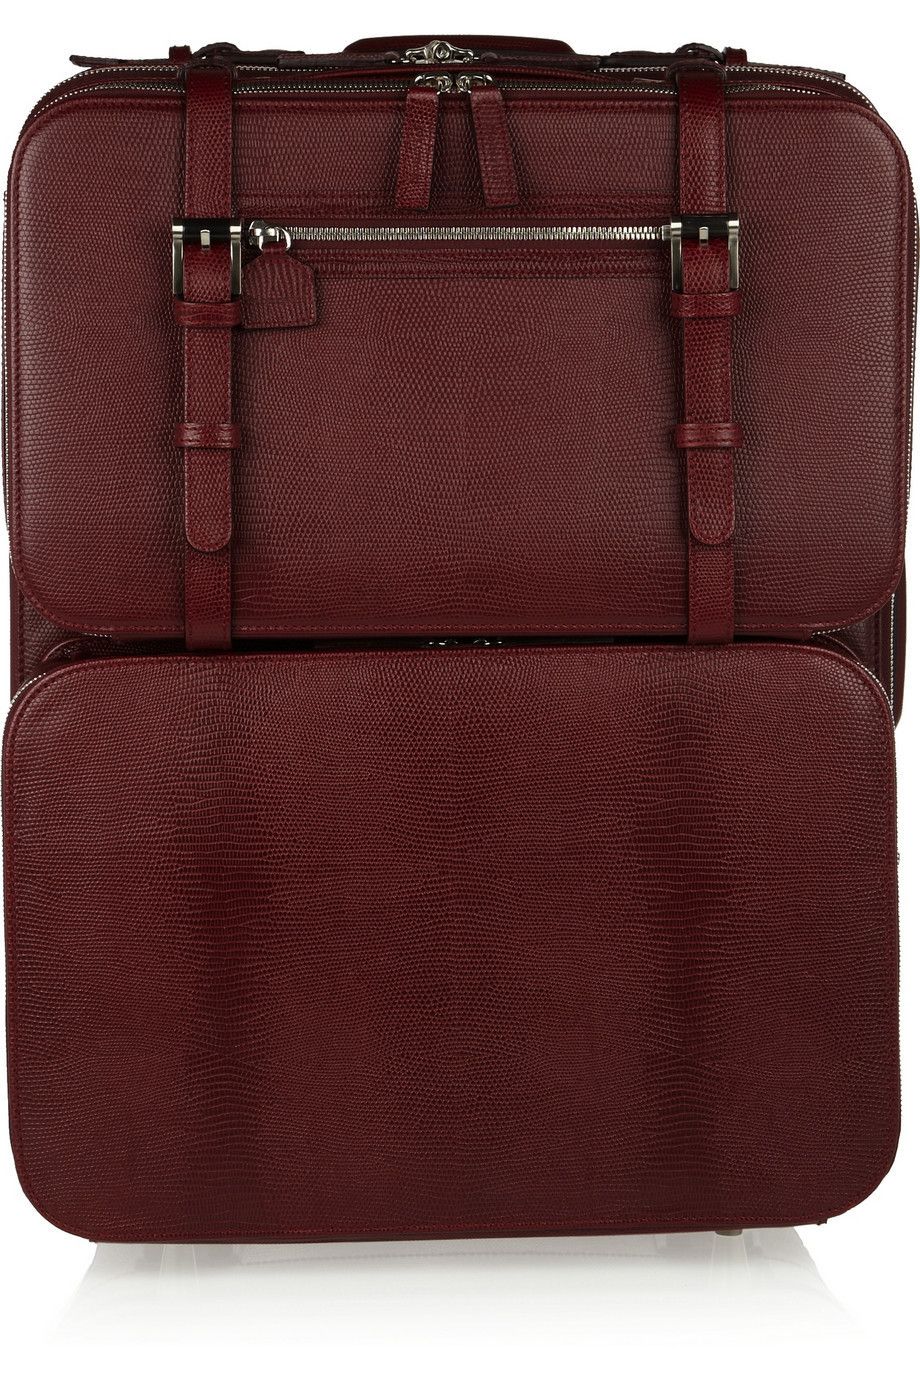 Brown, Textile, Red, Bag, Leather, Luggage and bags, Maroon, Tan, Baggage, Rectangle, 